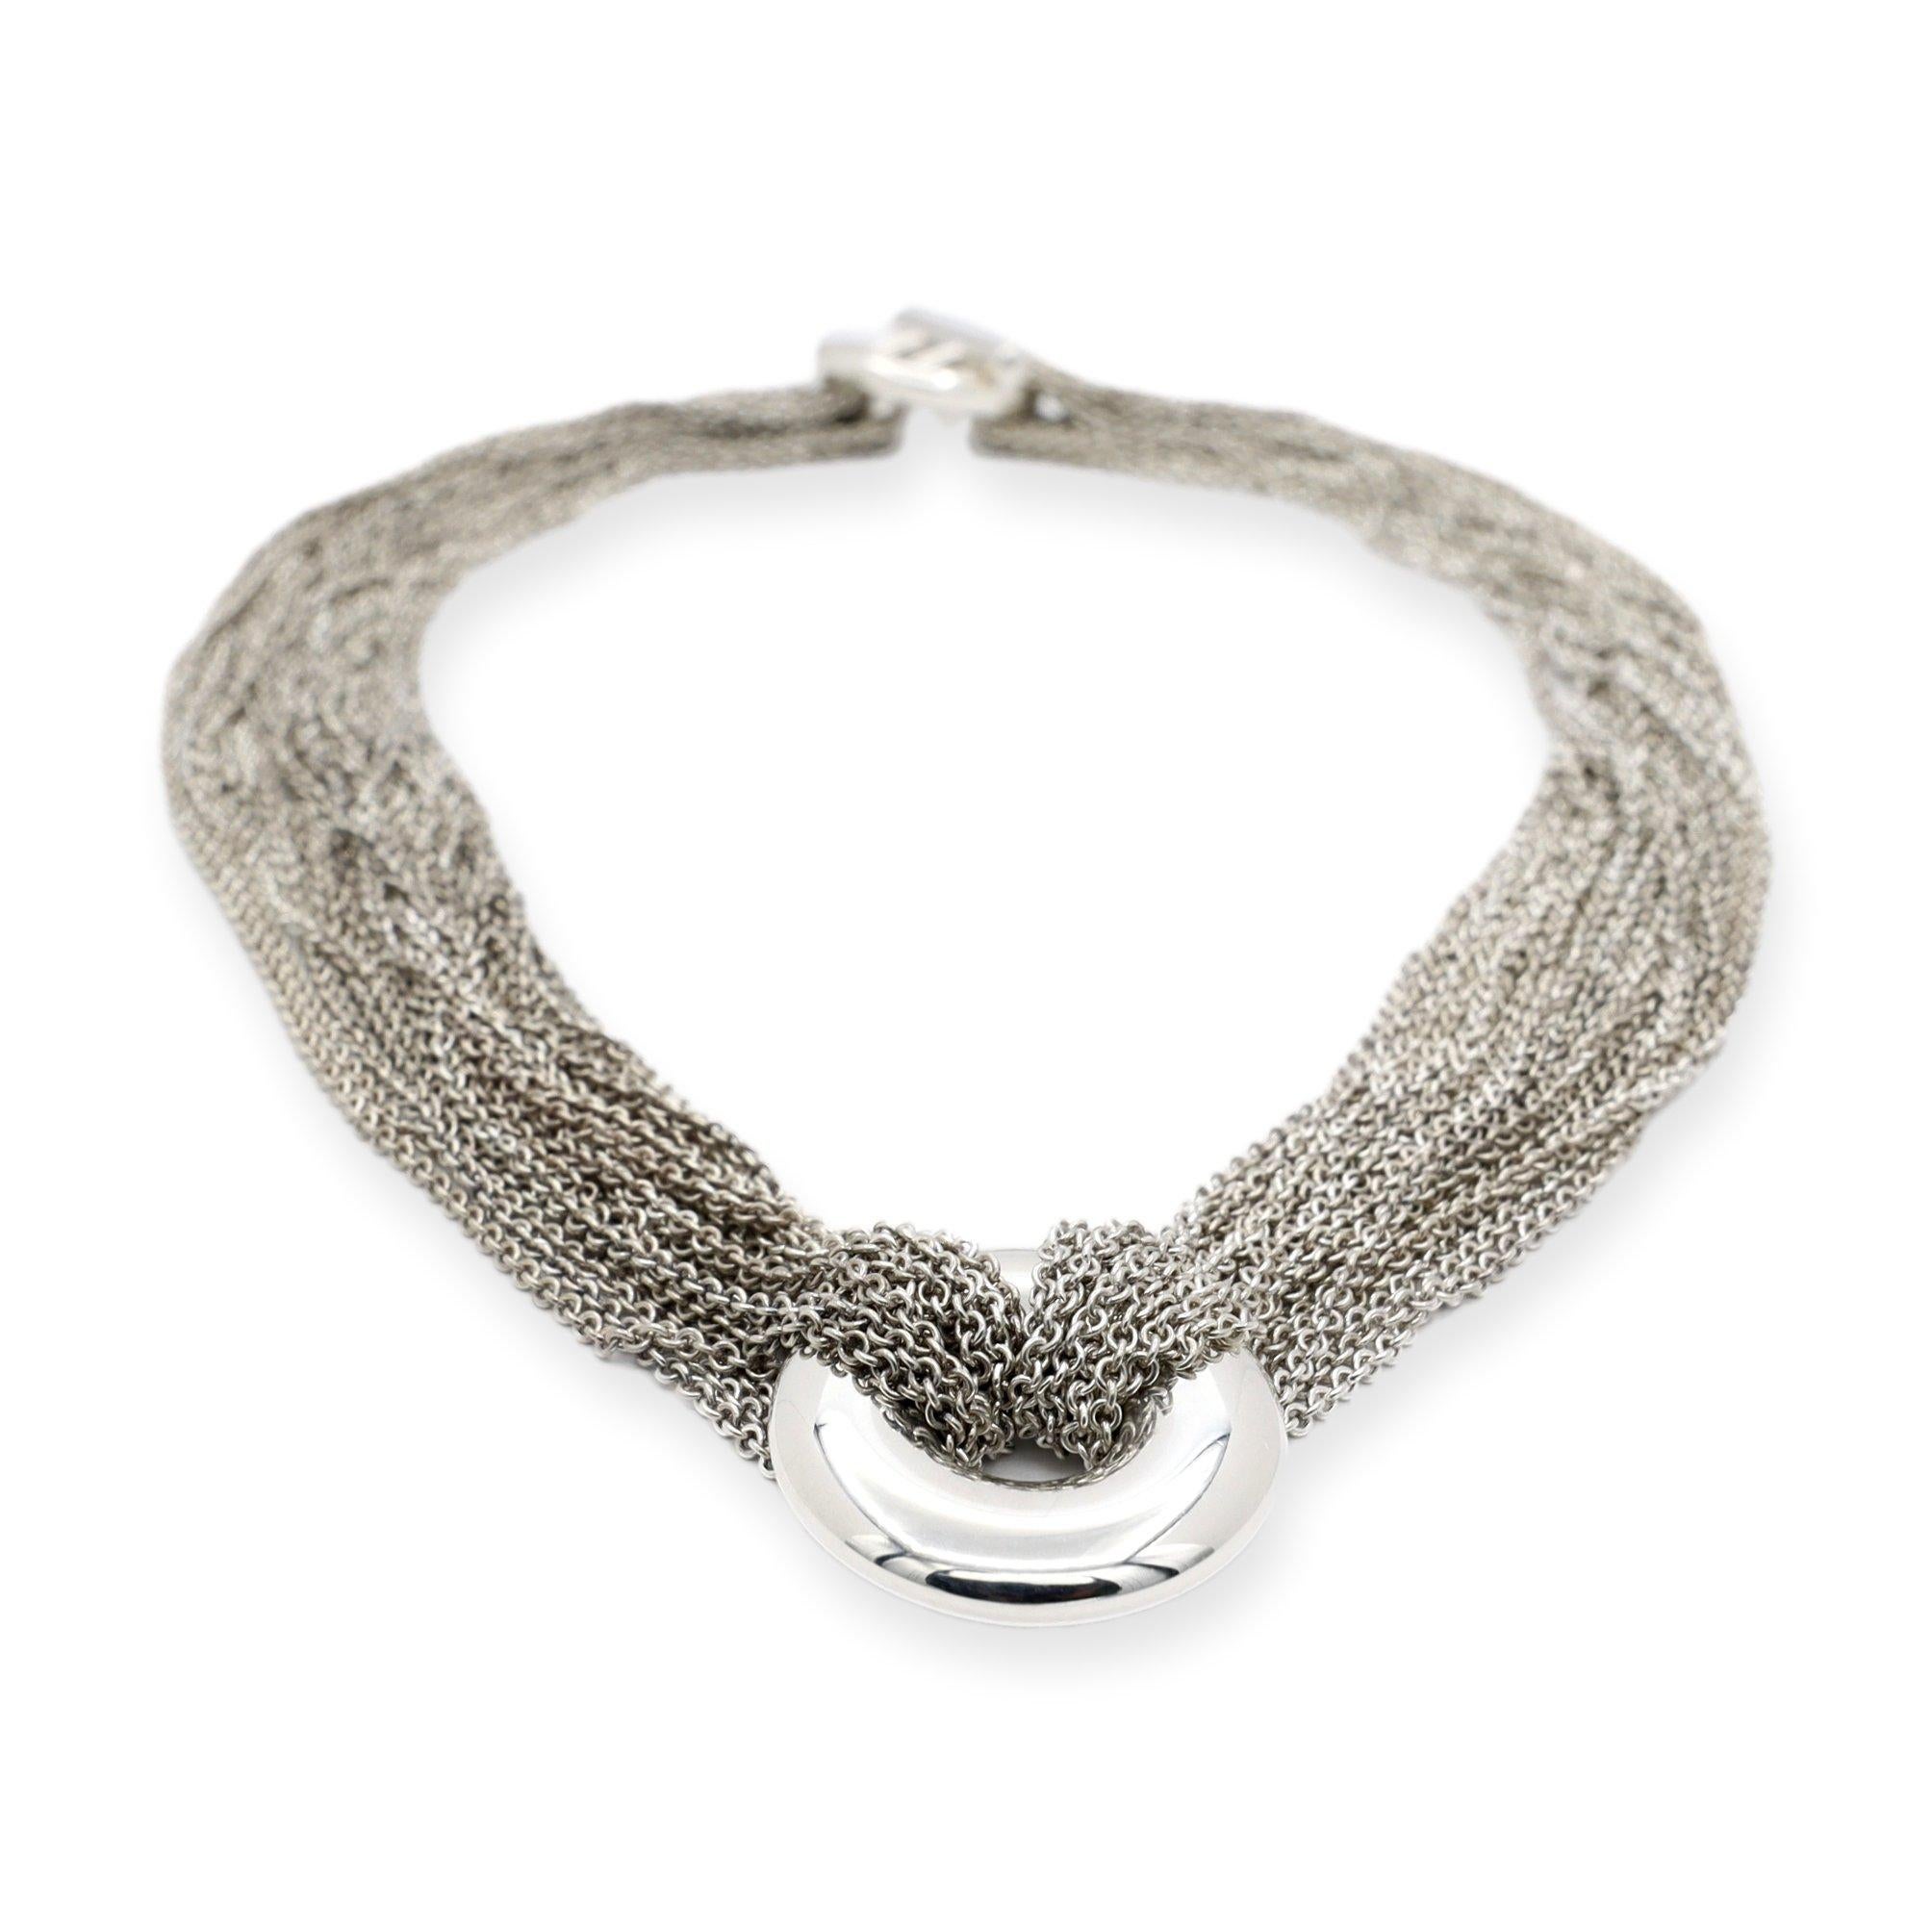 Tiffany & Co. choker necklace finely crafted in sterling silver featuring 20 strands of a mesh cable chain with a circle pendant slide in the center. Necklace has a toggle closure and a 16 inch length. Fully hallmarked with logo and metal